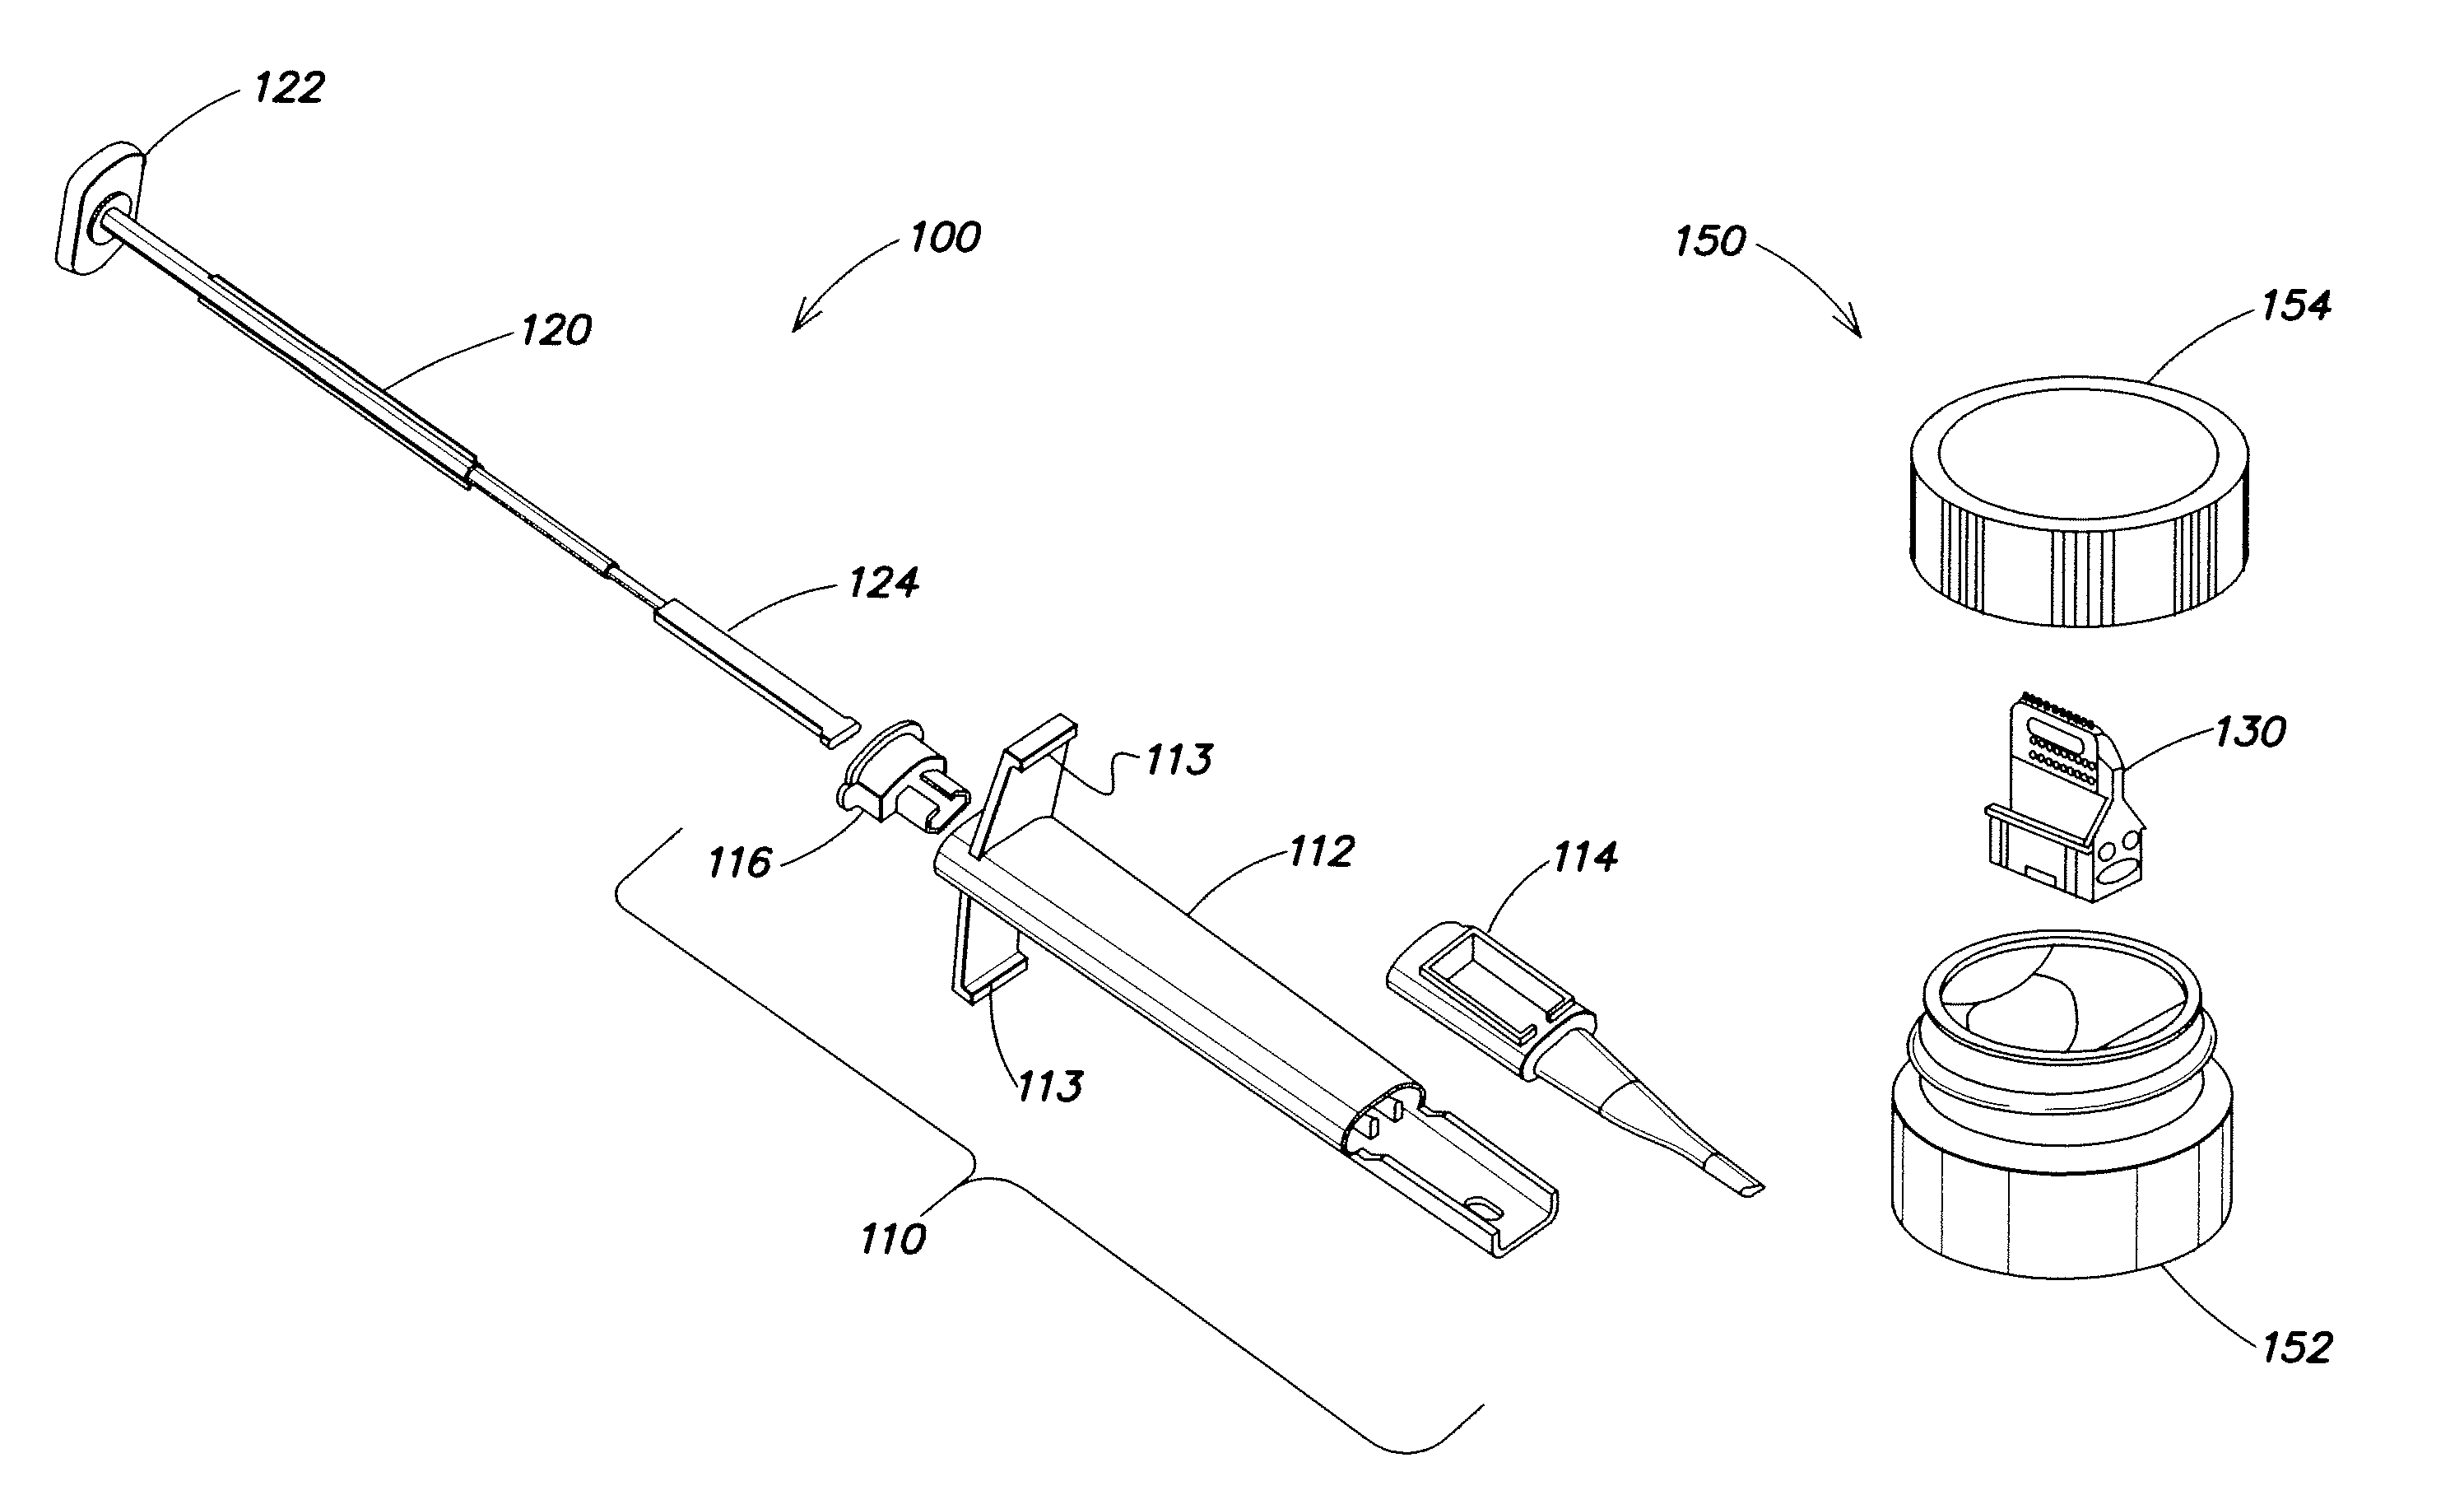 Intraocular lens injector system